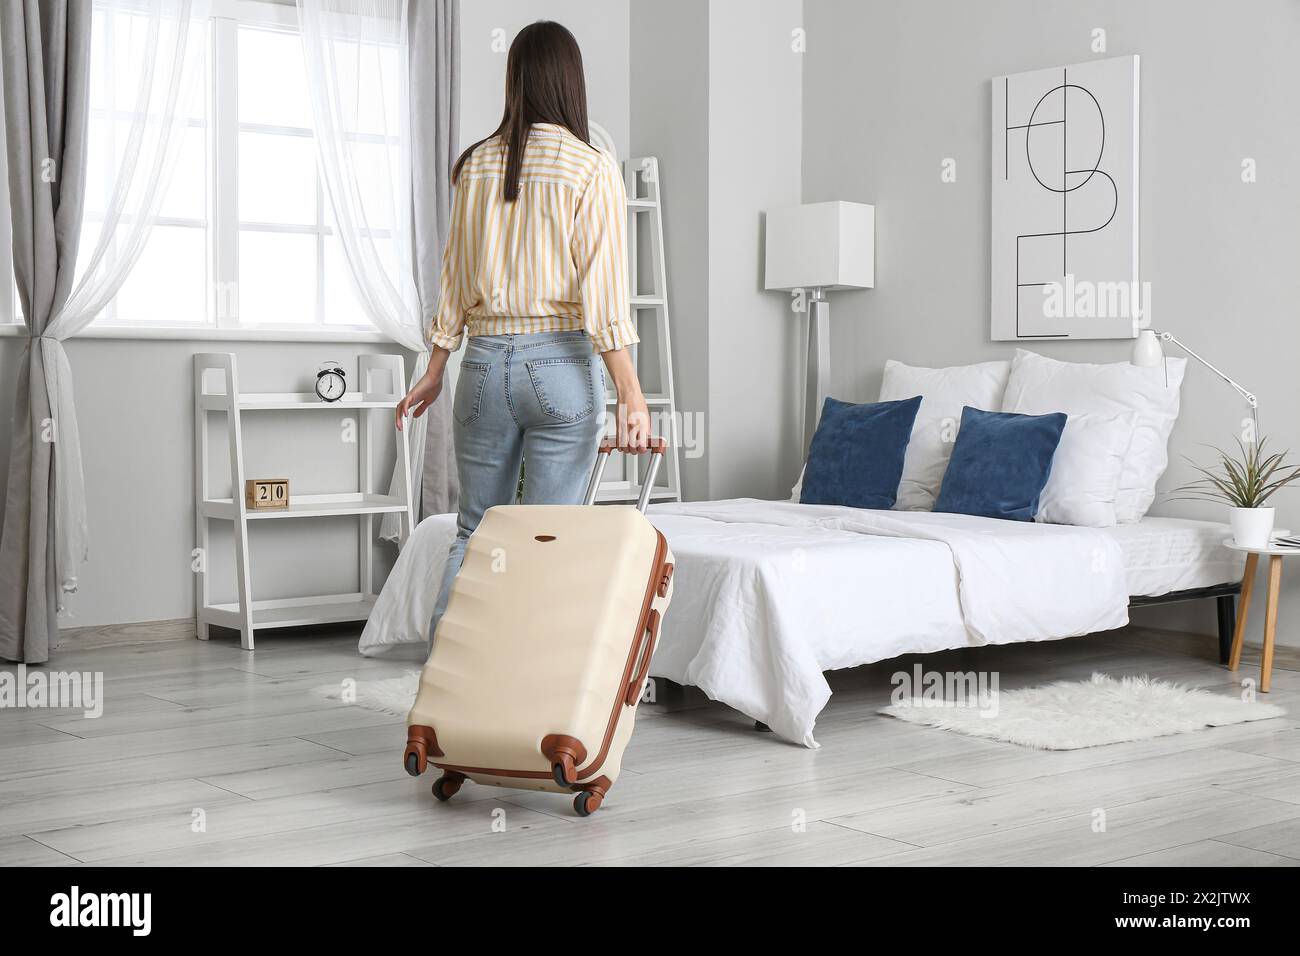 Woman with suitcase in light hotel room, back view Stock Photo